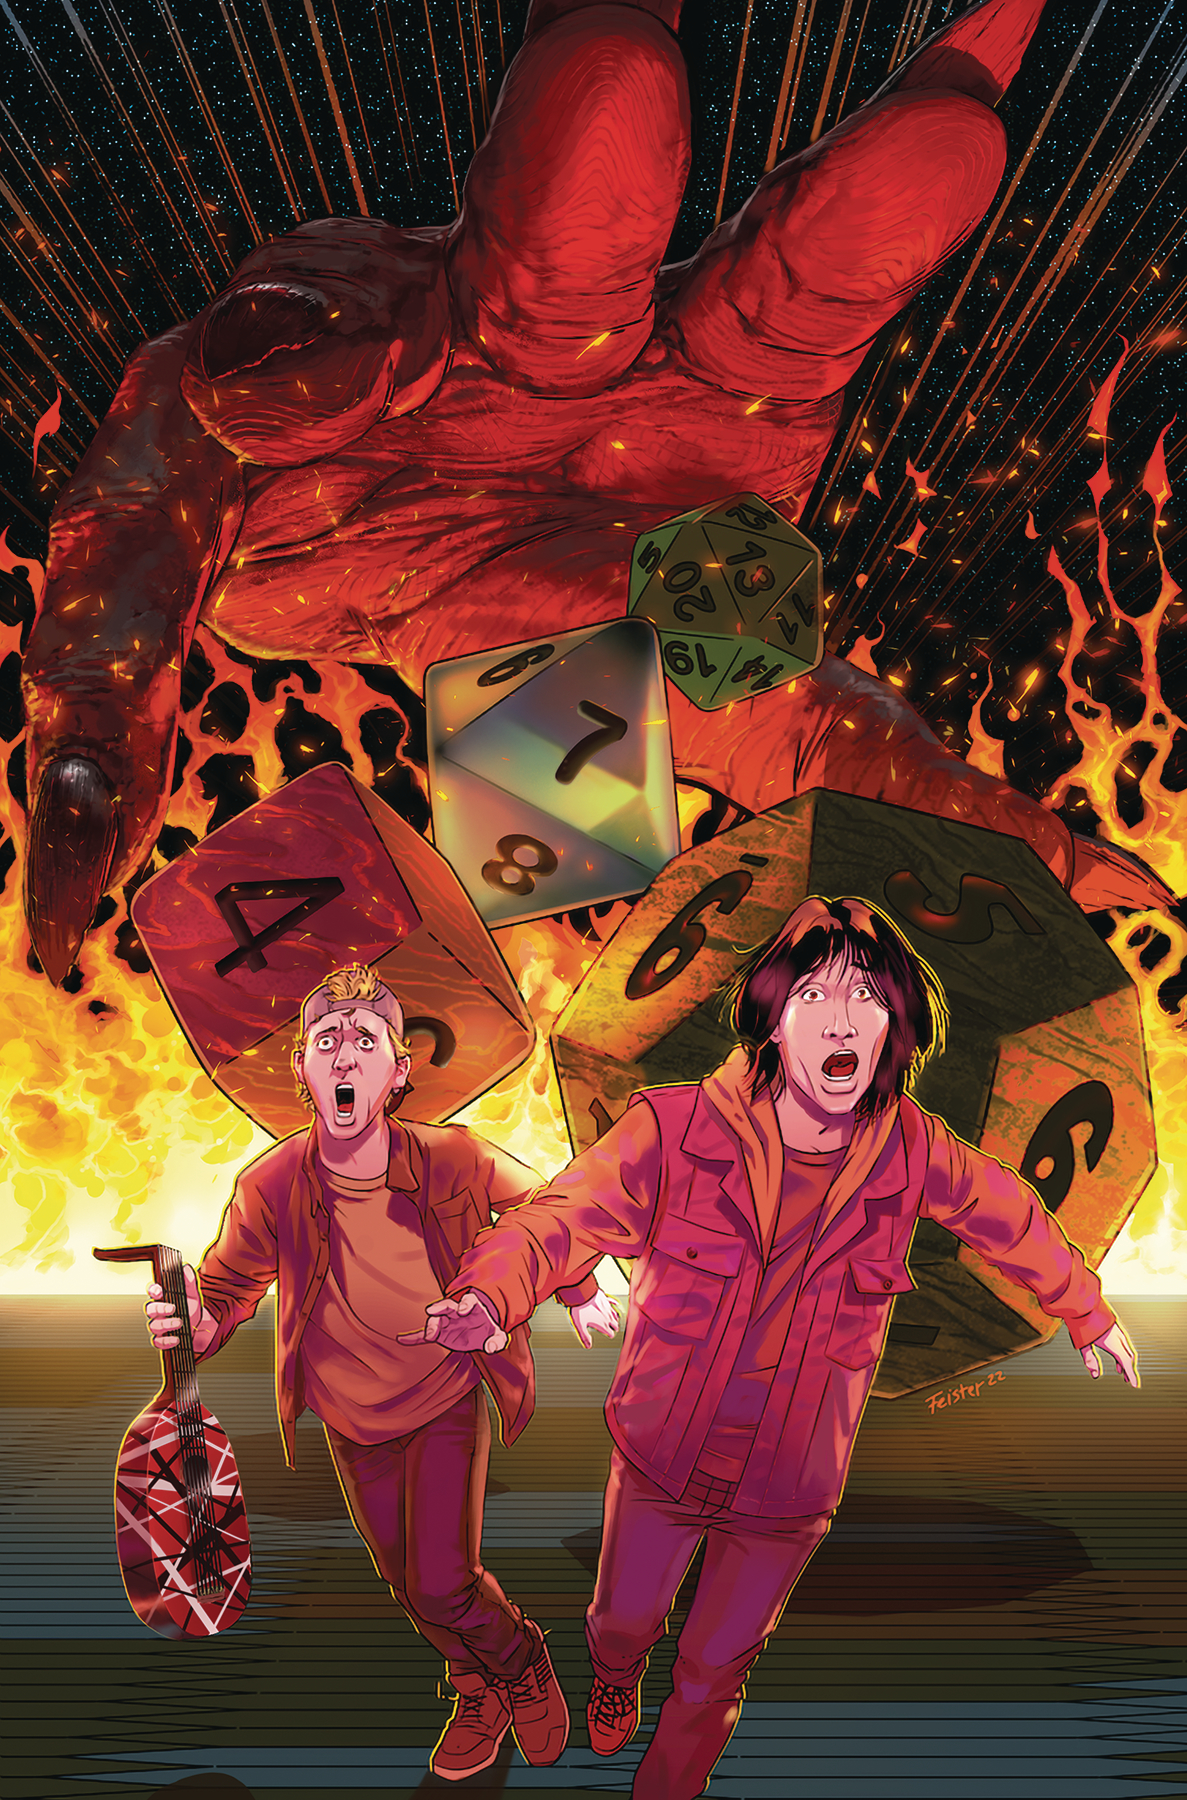 Bill & Ted Roll Dice #1 Cover D 1 for 10 Incentive Feister